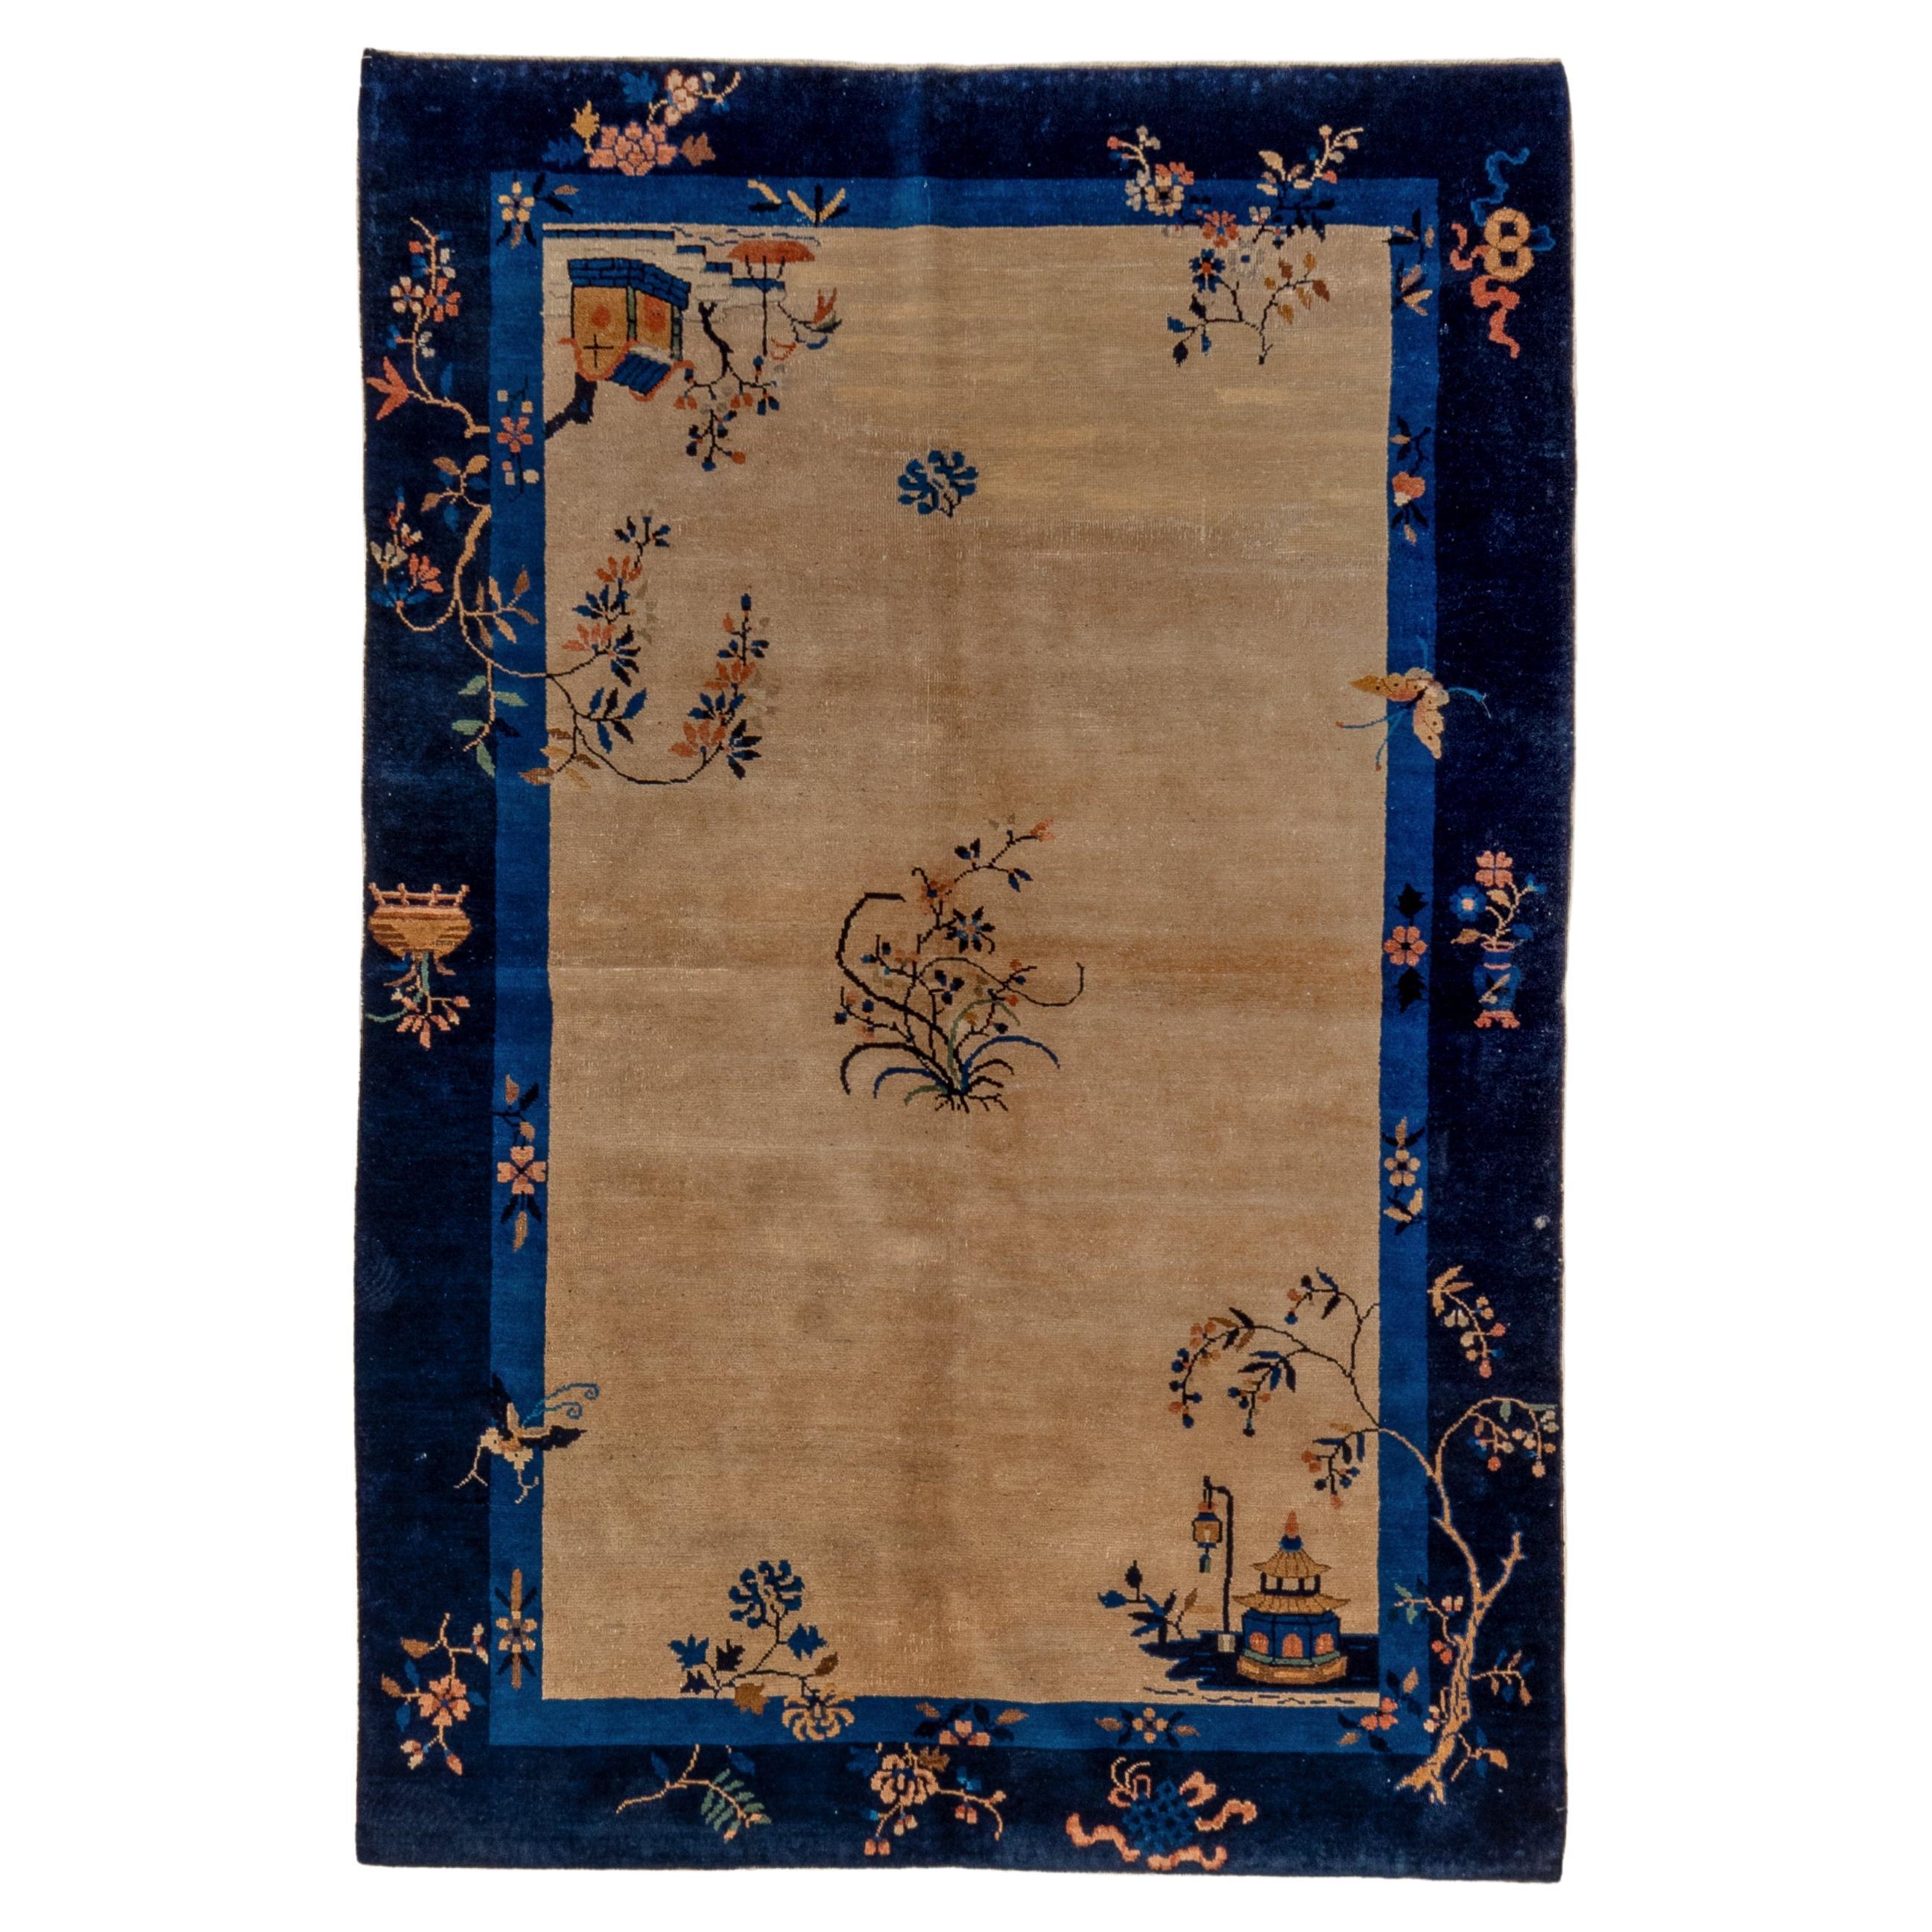 Interwar Art Deco Chinese Rug with a Straw Field and a Blue Border